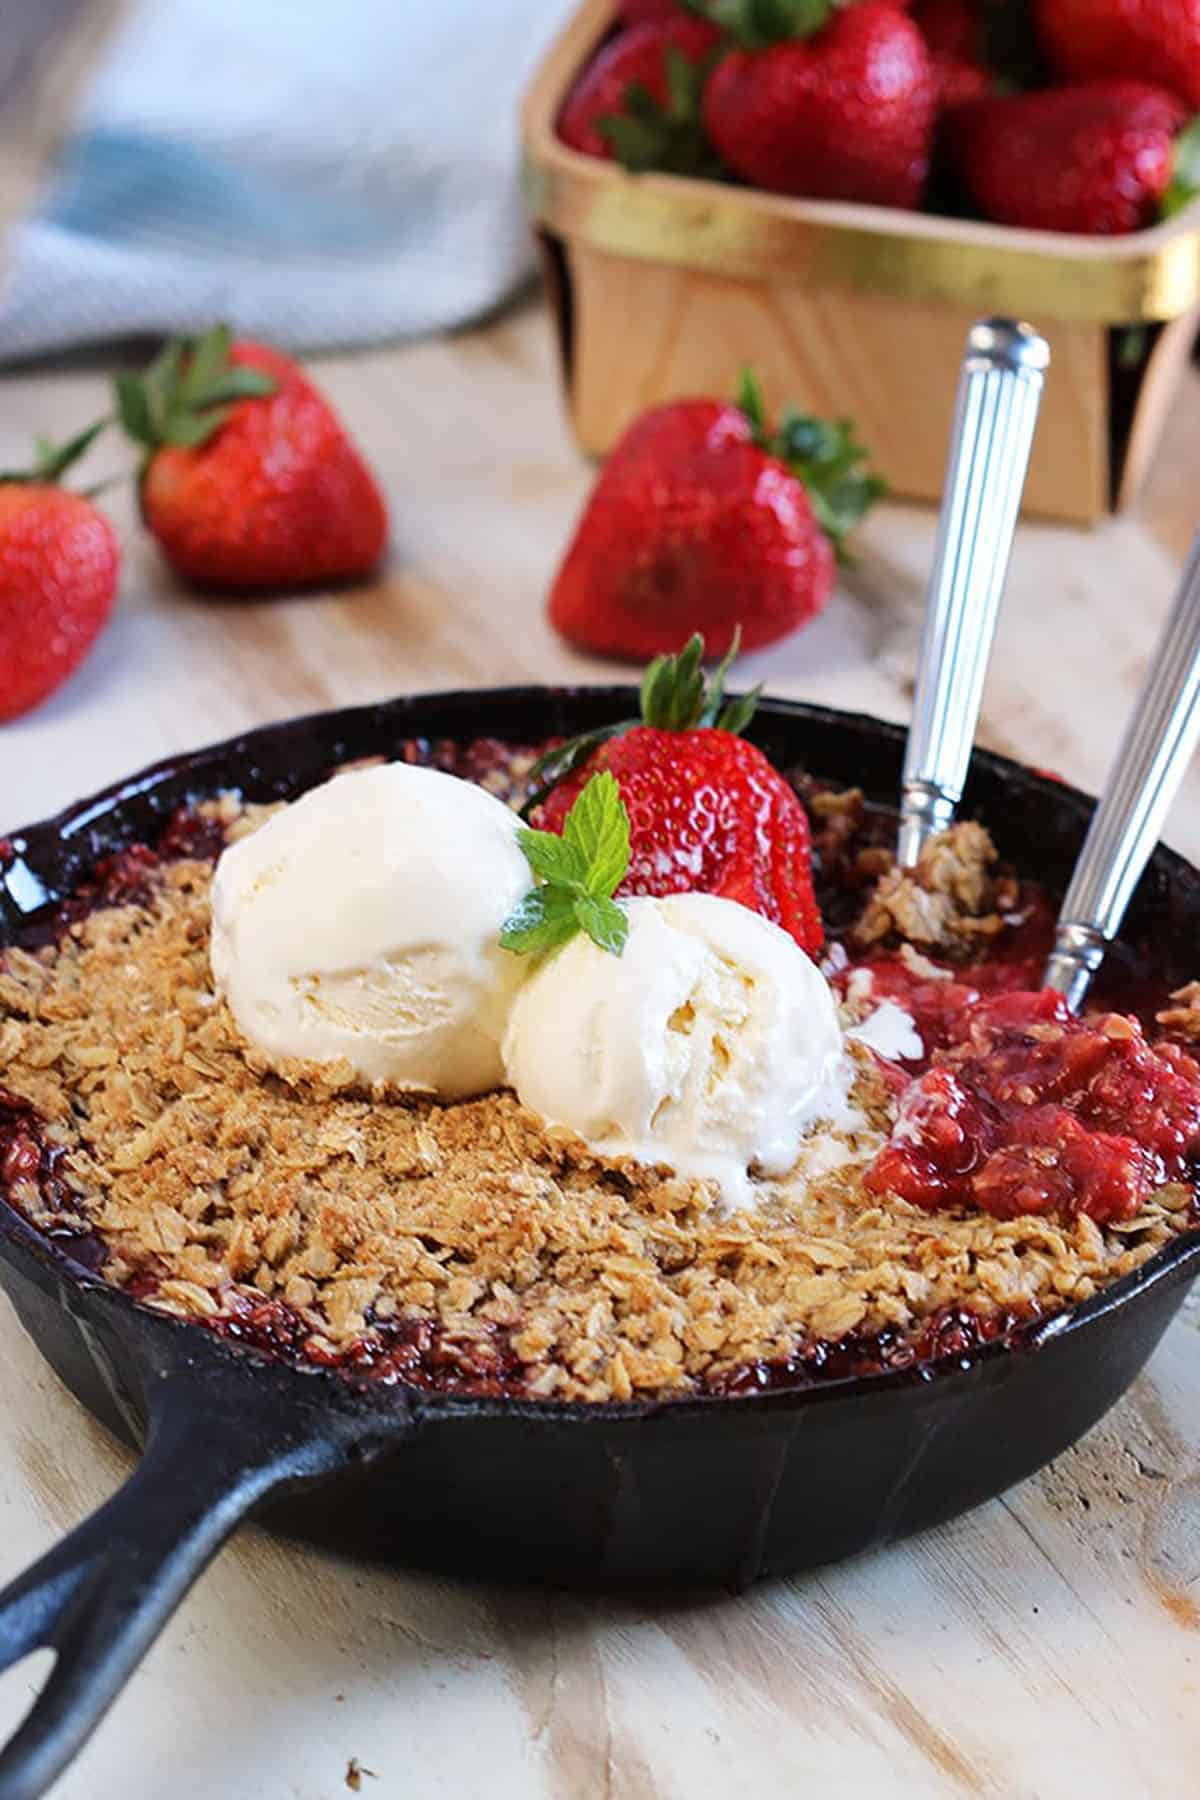 Strawberry Rhubarb Crisp in a cast iron skillet with two forks in it and two scoops of ice cream on top. Berries in a basket in the background.